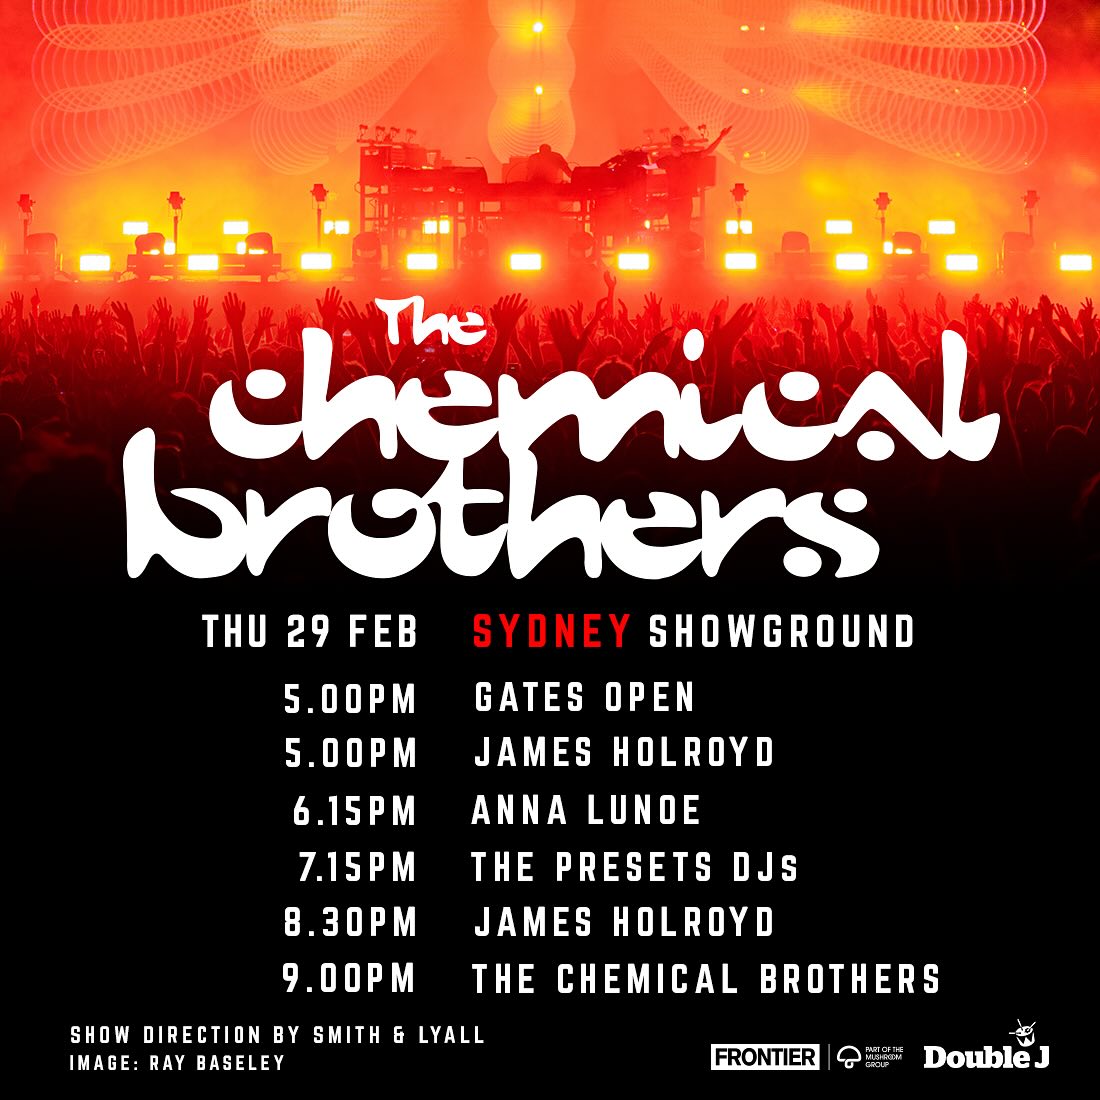 Ahead of The Chemical Brothers taking over Sydney Showground, familiarise yourself with the set times and make sure you stay hydrated! Last minute tickets still available via: axs.com/au/events/5002…